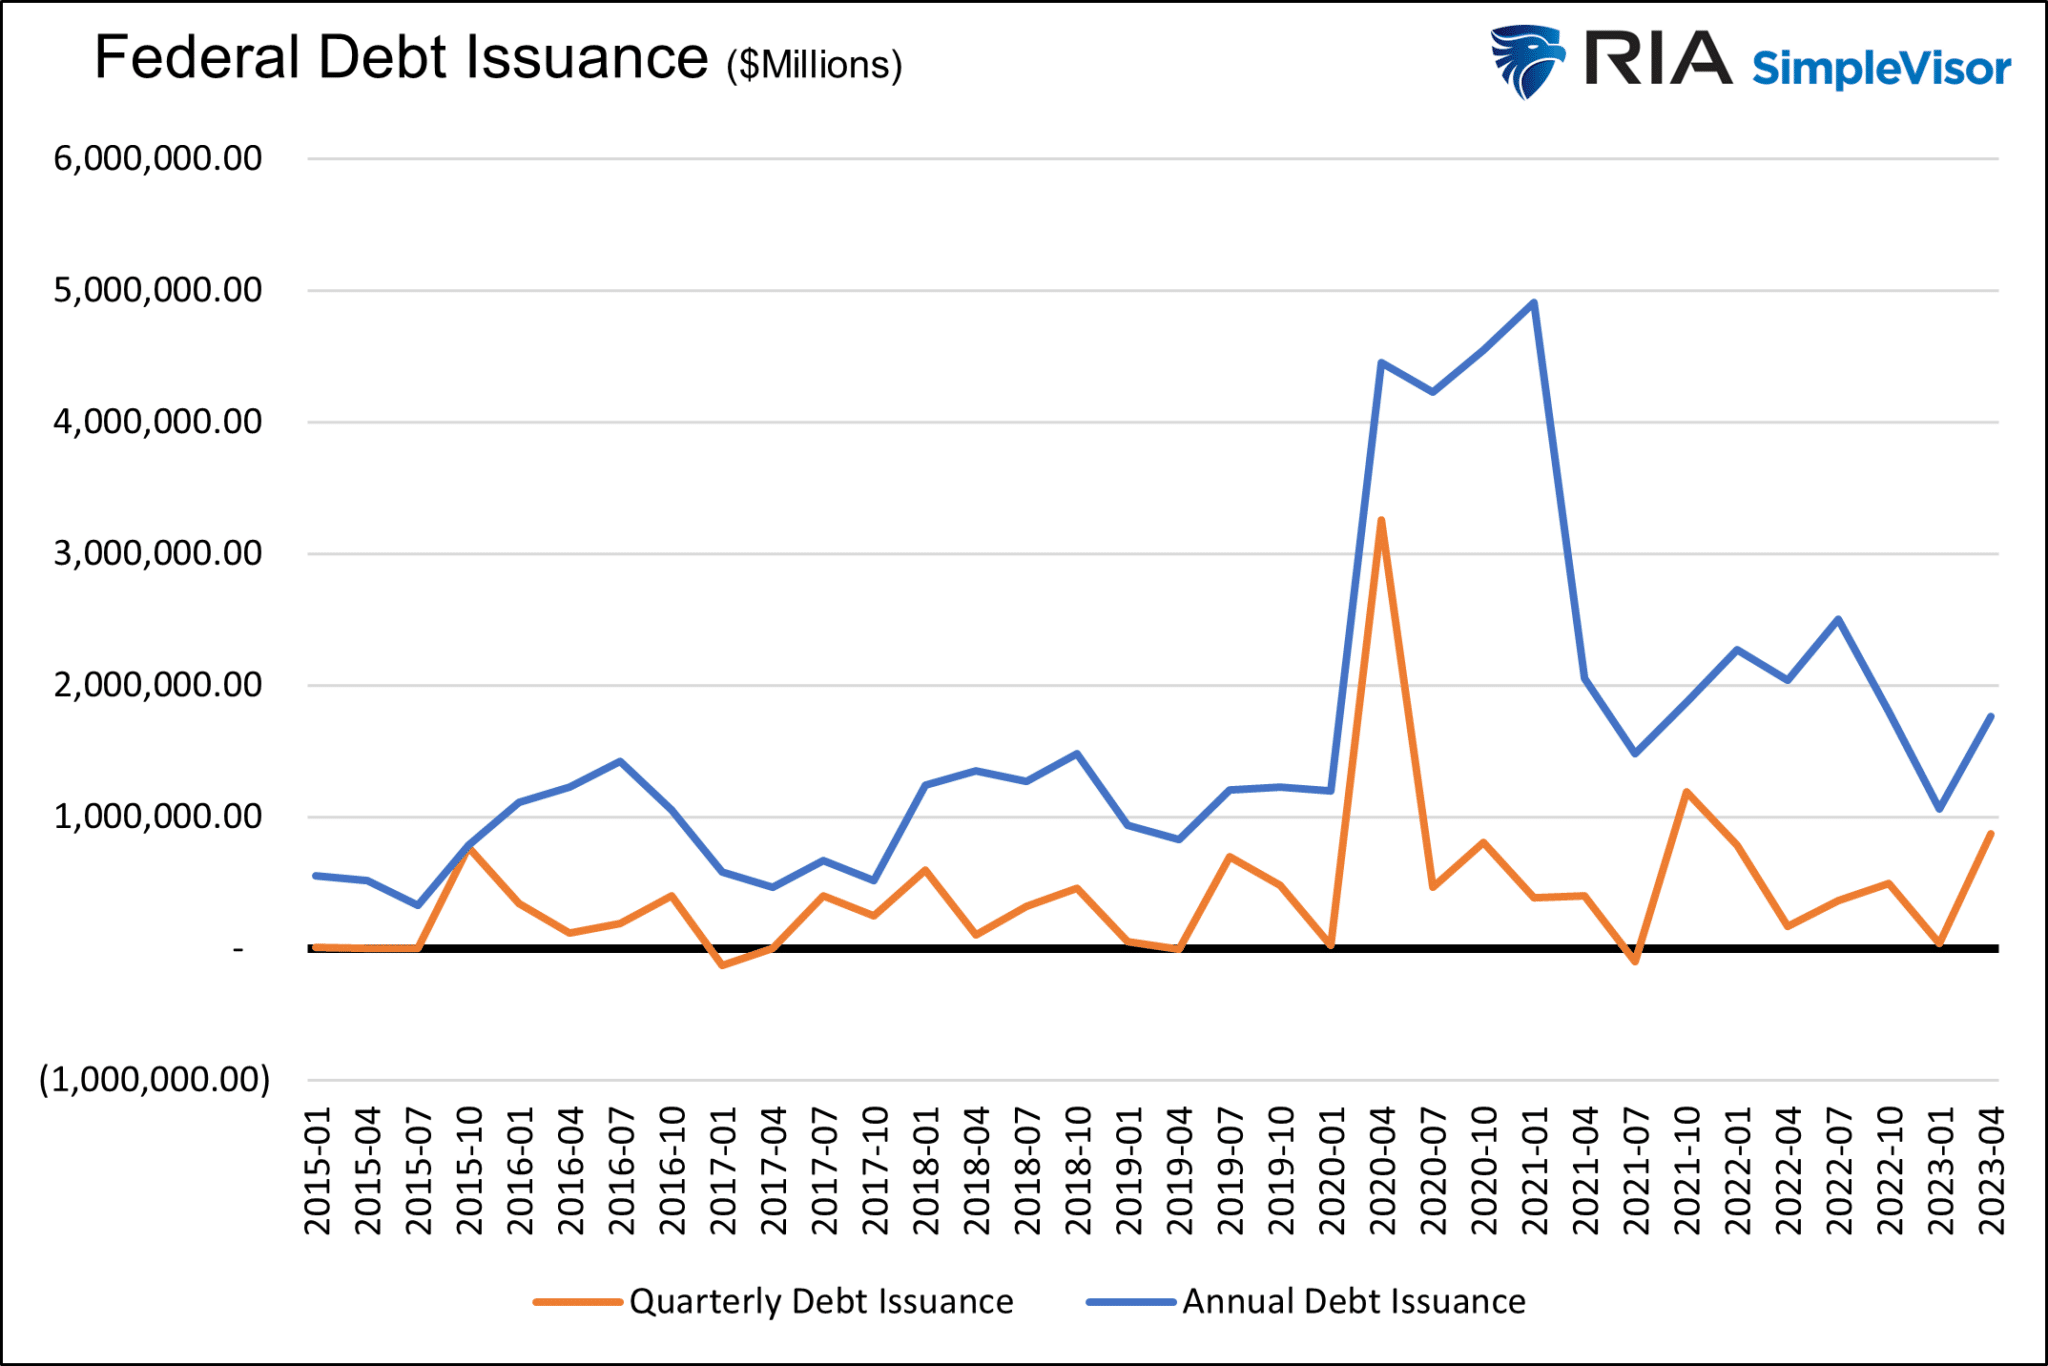 Federal Debt Issuance